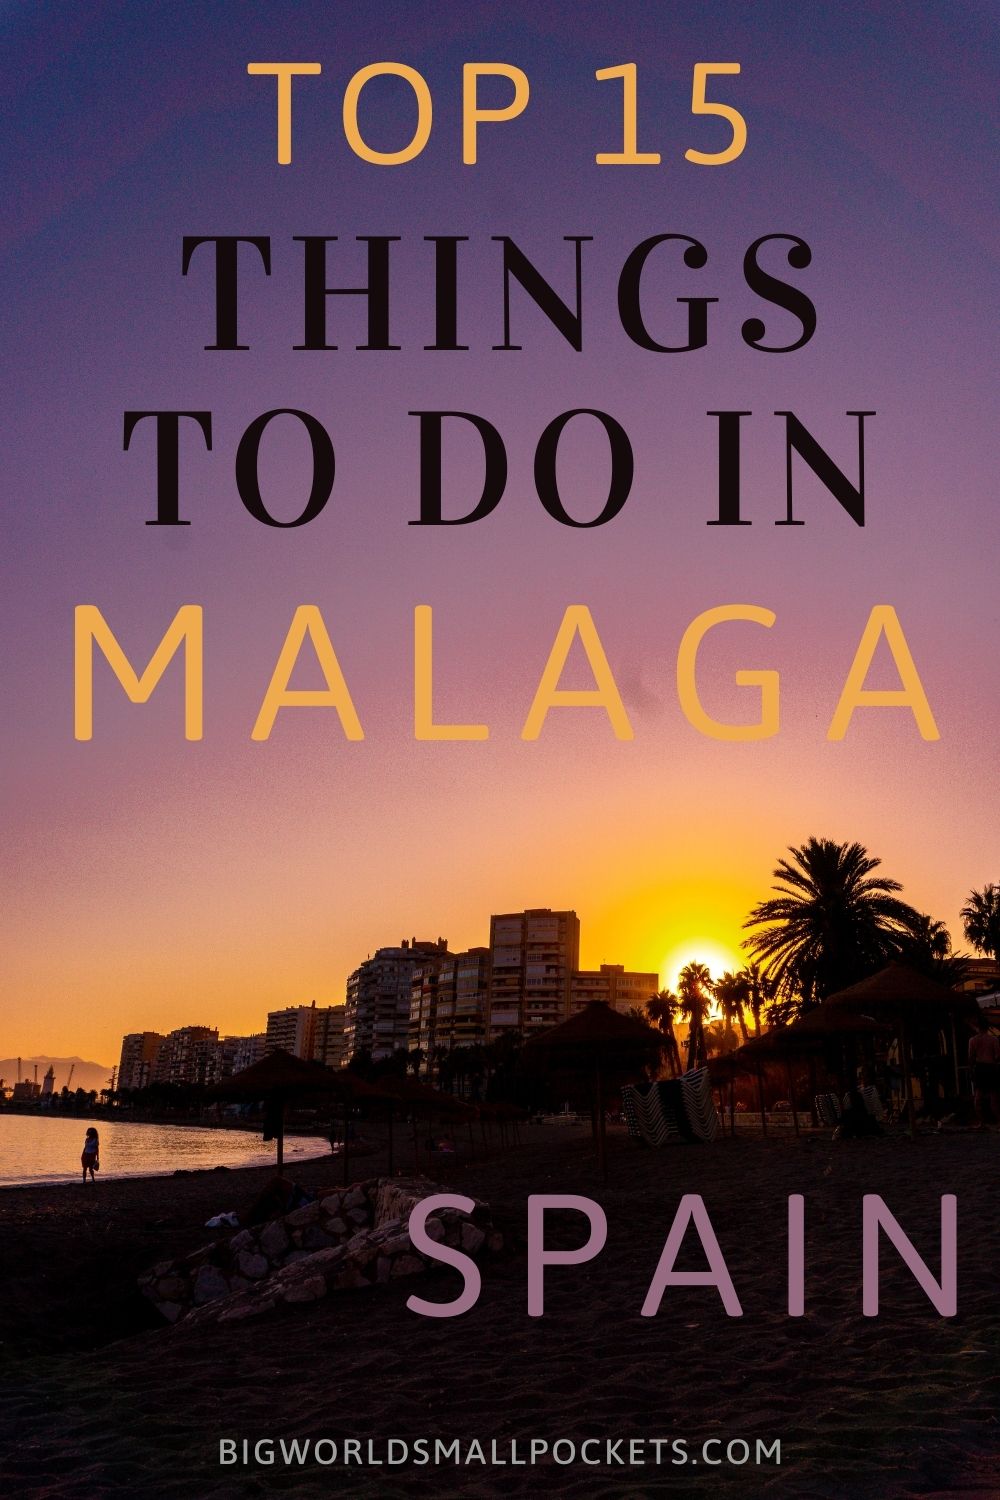 Top 15 Things to Do in Malaga, Andalusia, Spain